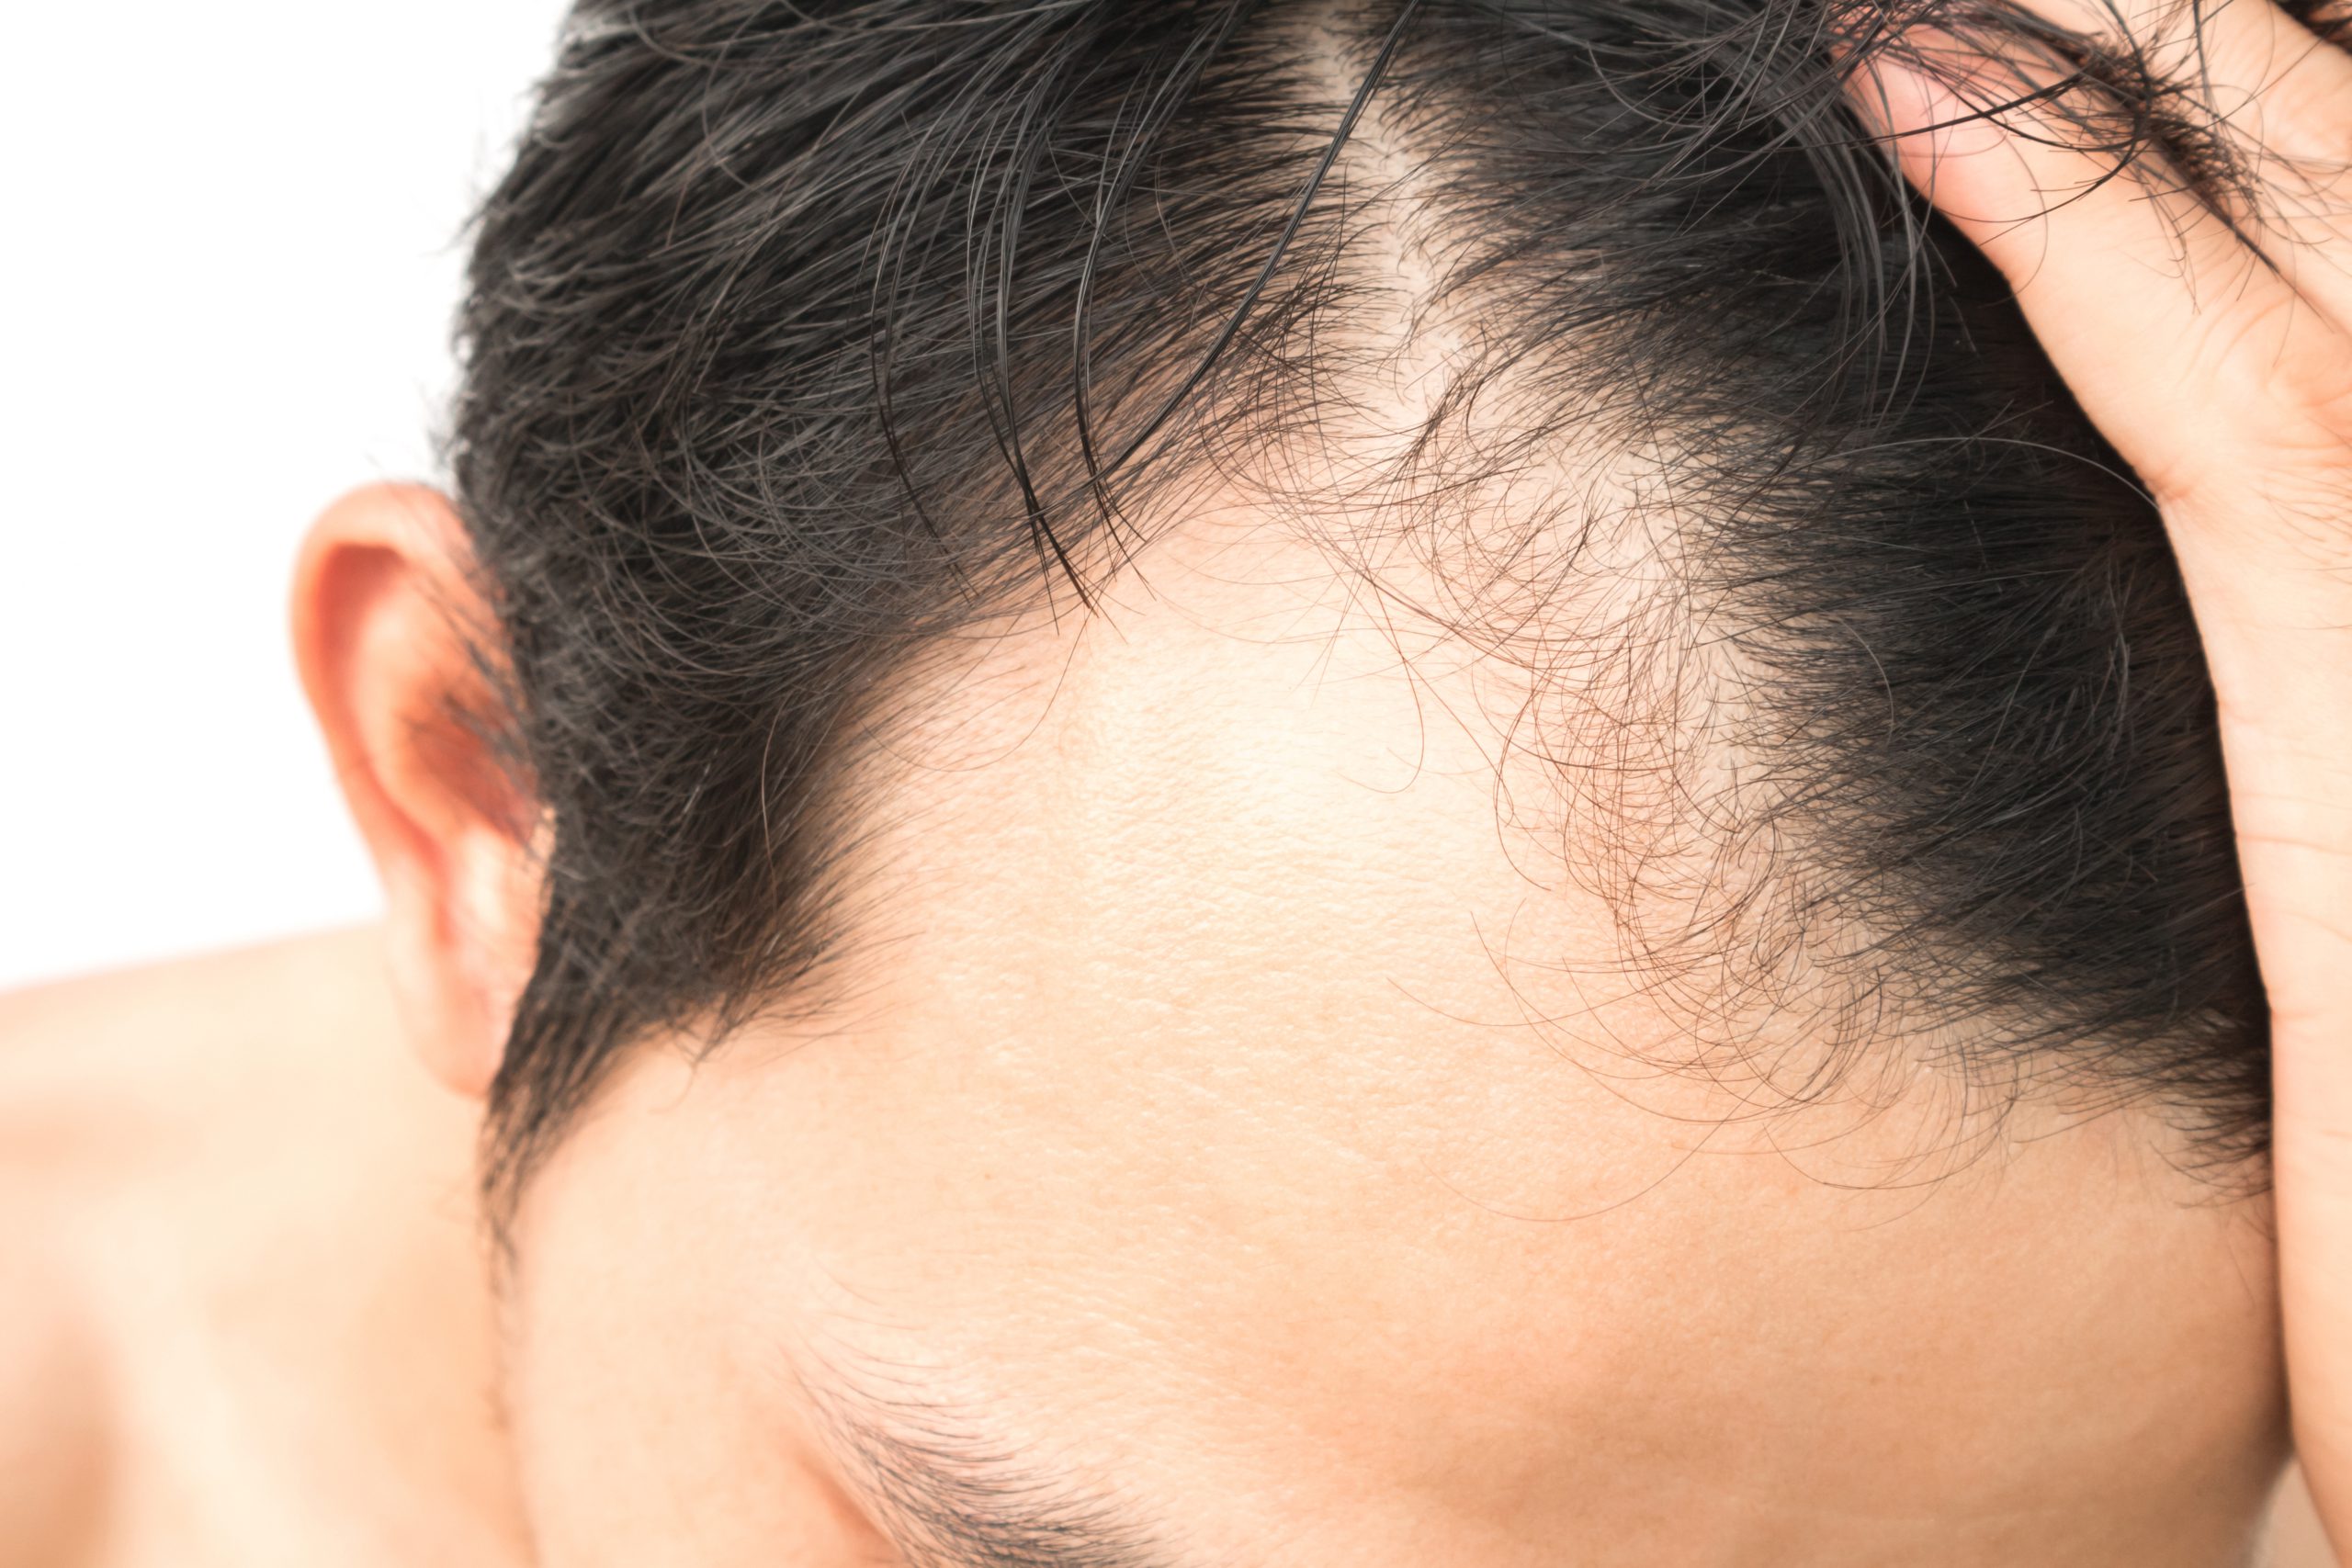 Hair Transplant Downtime Explained by An Expert